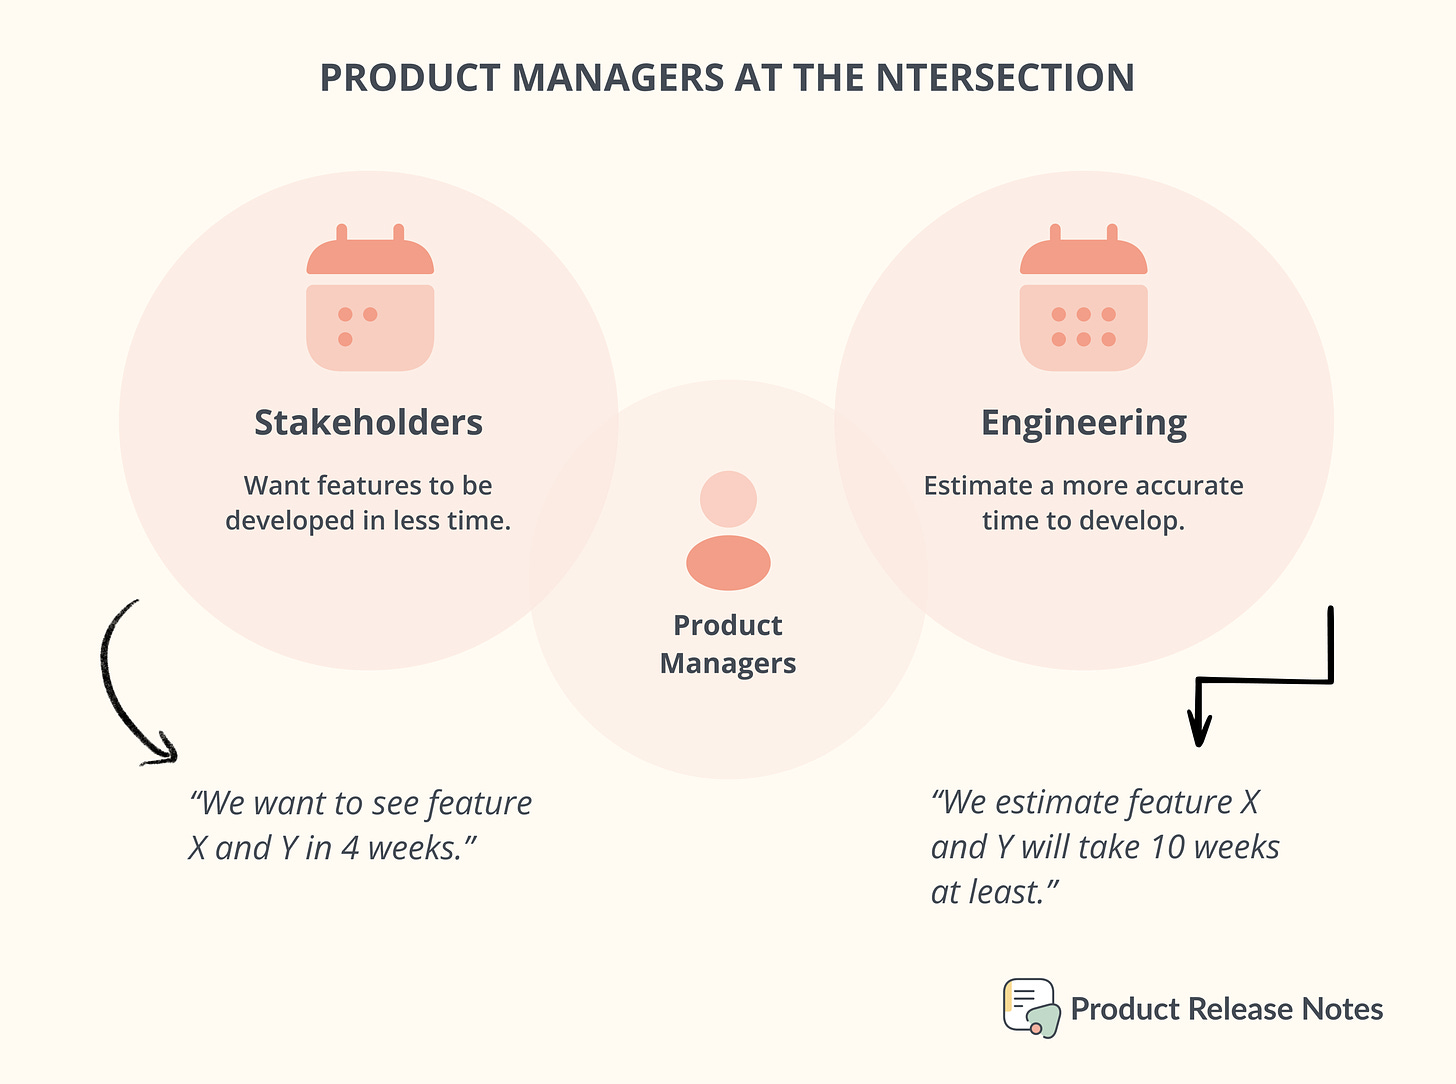 Product Managers at the intersection of balancing engineering efforts with what stakeholders want.